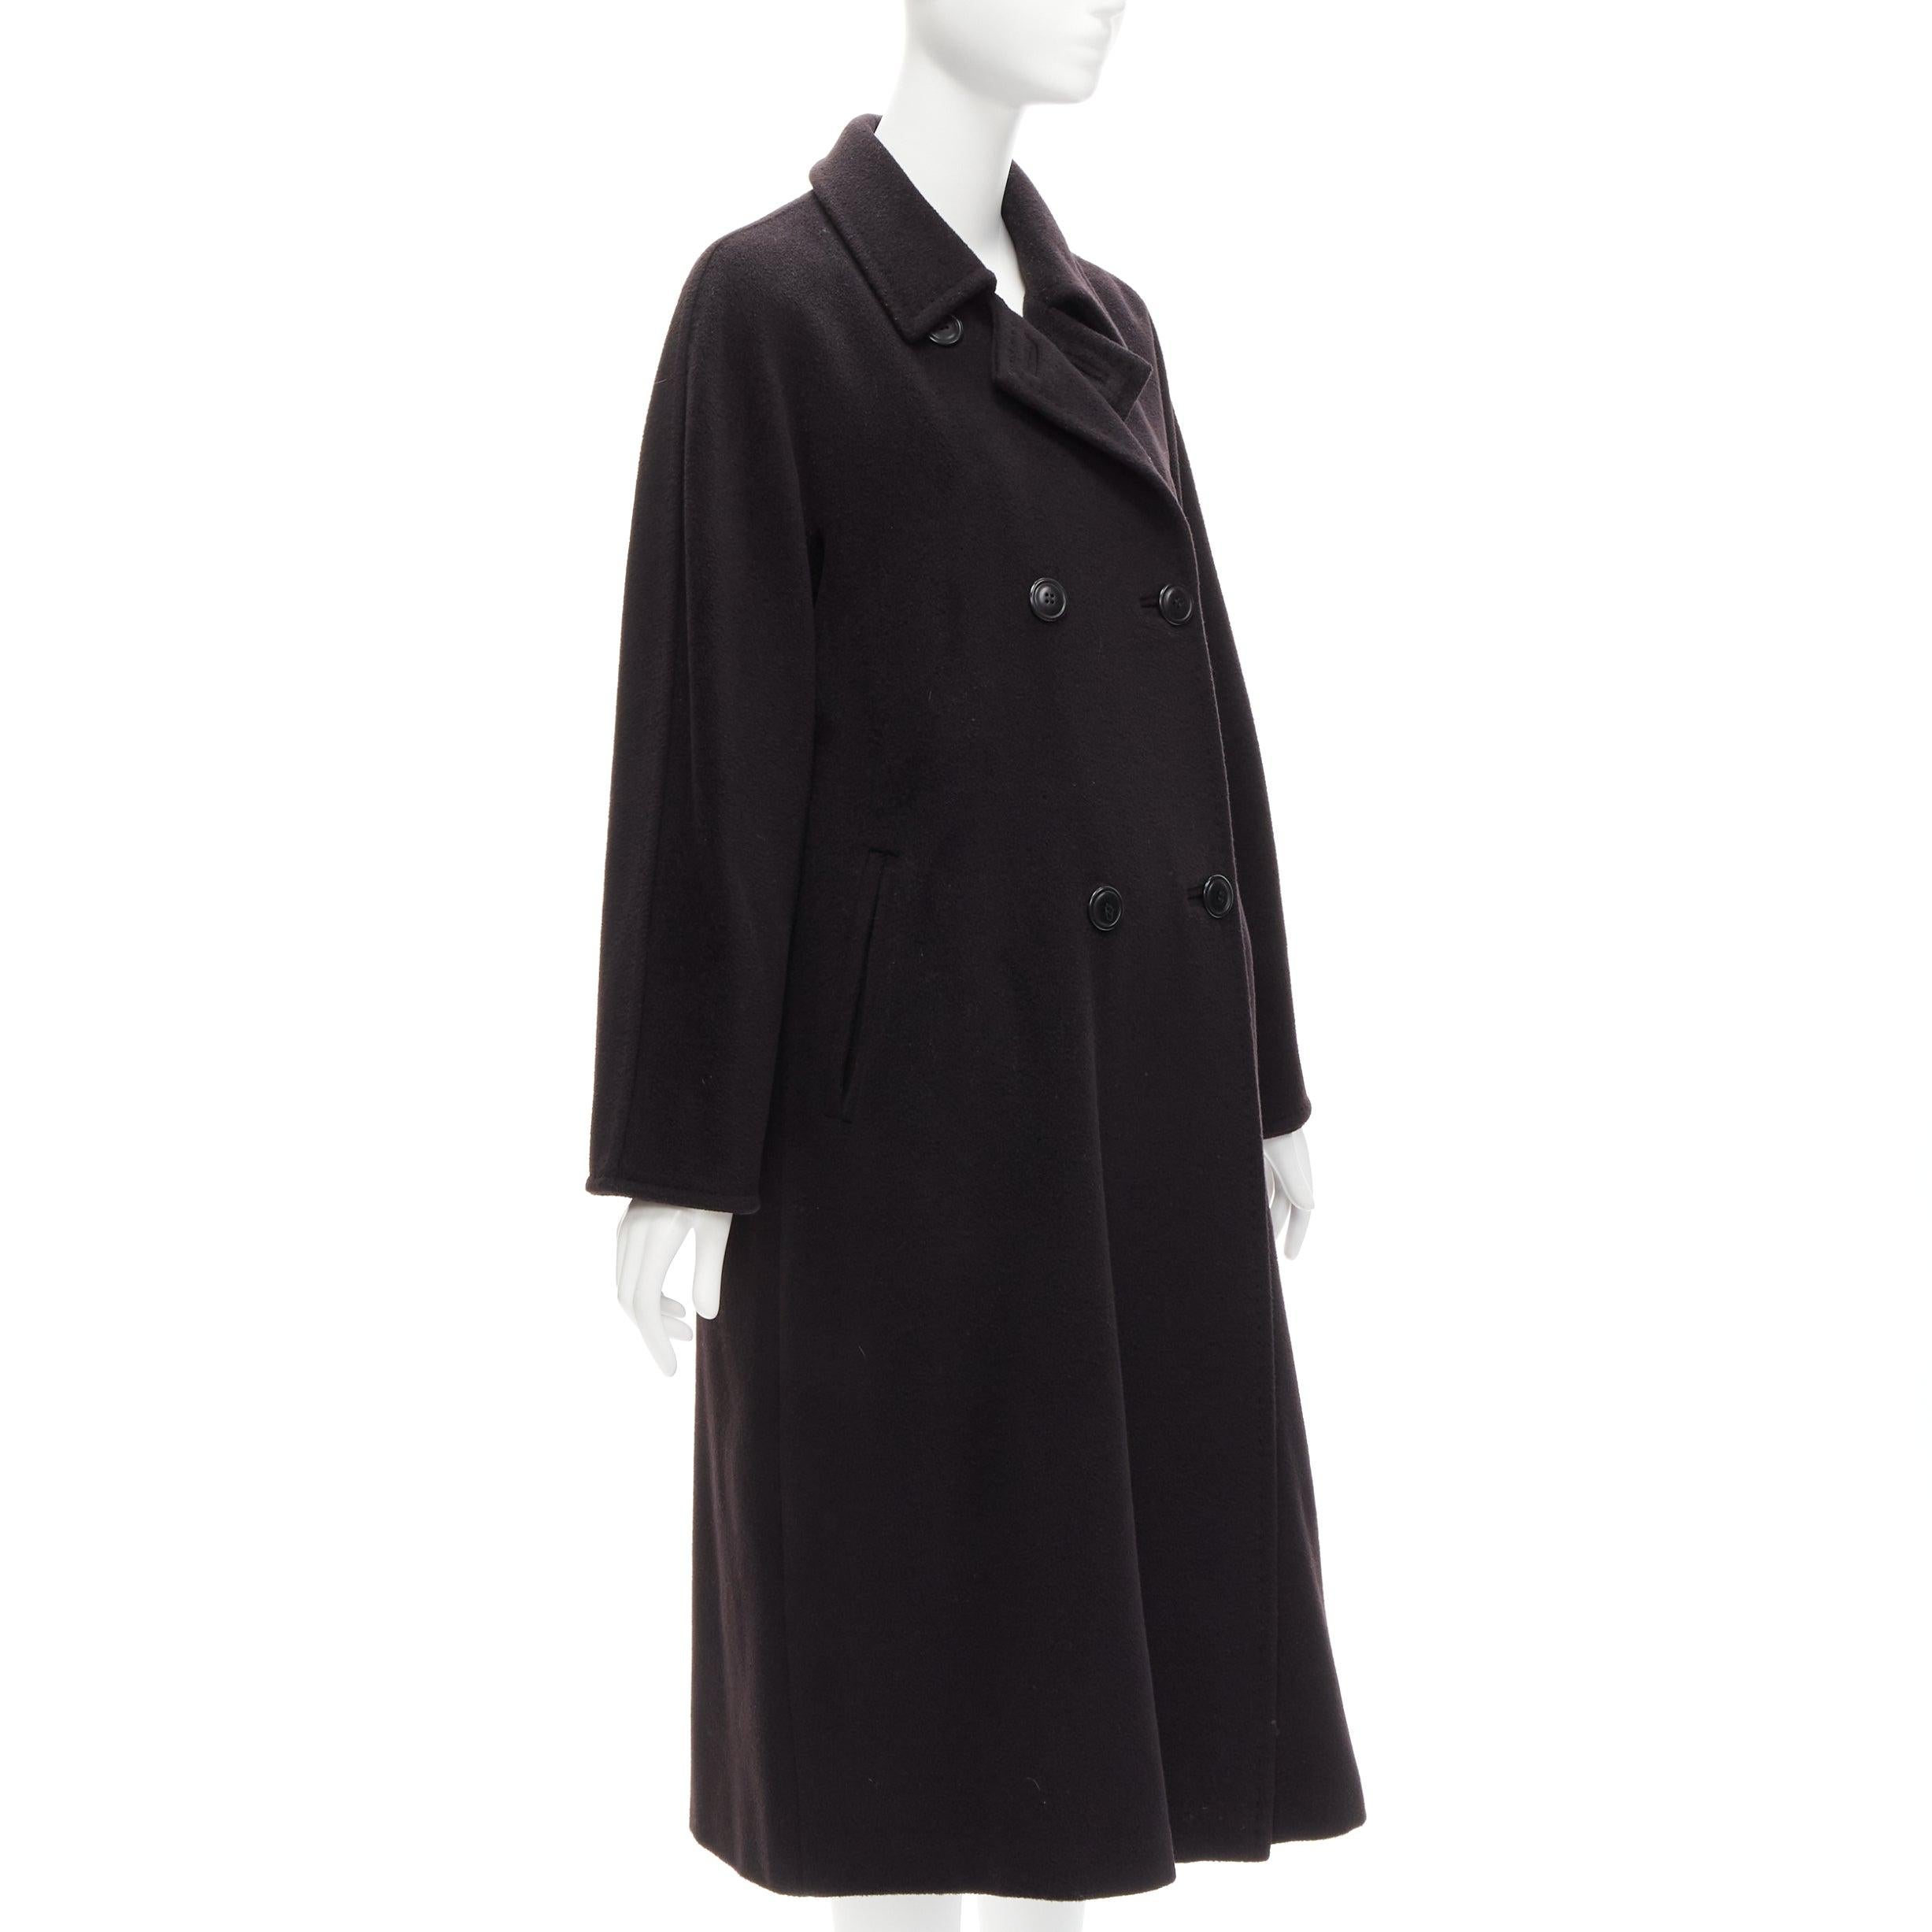 MAX MARA black virgin wool cashmere double breasted coat IT36 XXS
Reference: TGAS/D00948
Brand: Max Mara
Material: Virgin Wool, Cashmere
Color: Black
Pattern: Solid
Closure: Button
Lining: Black Fully Lined
Extra Details: Single vent back.
Made in: